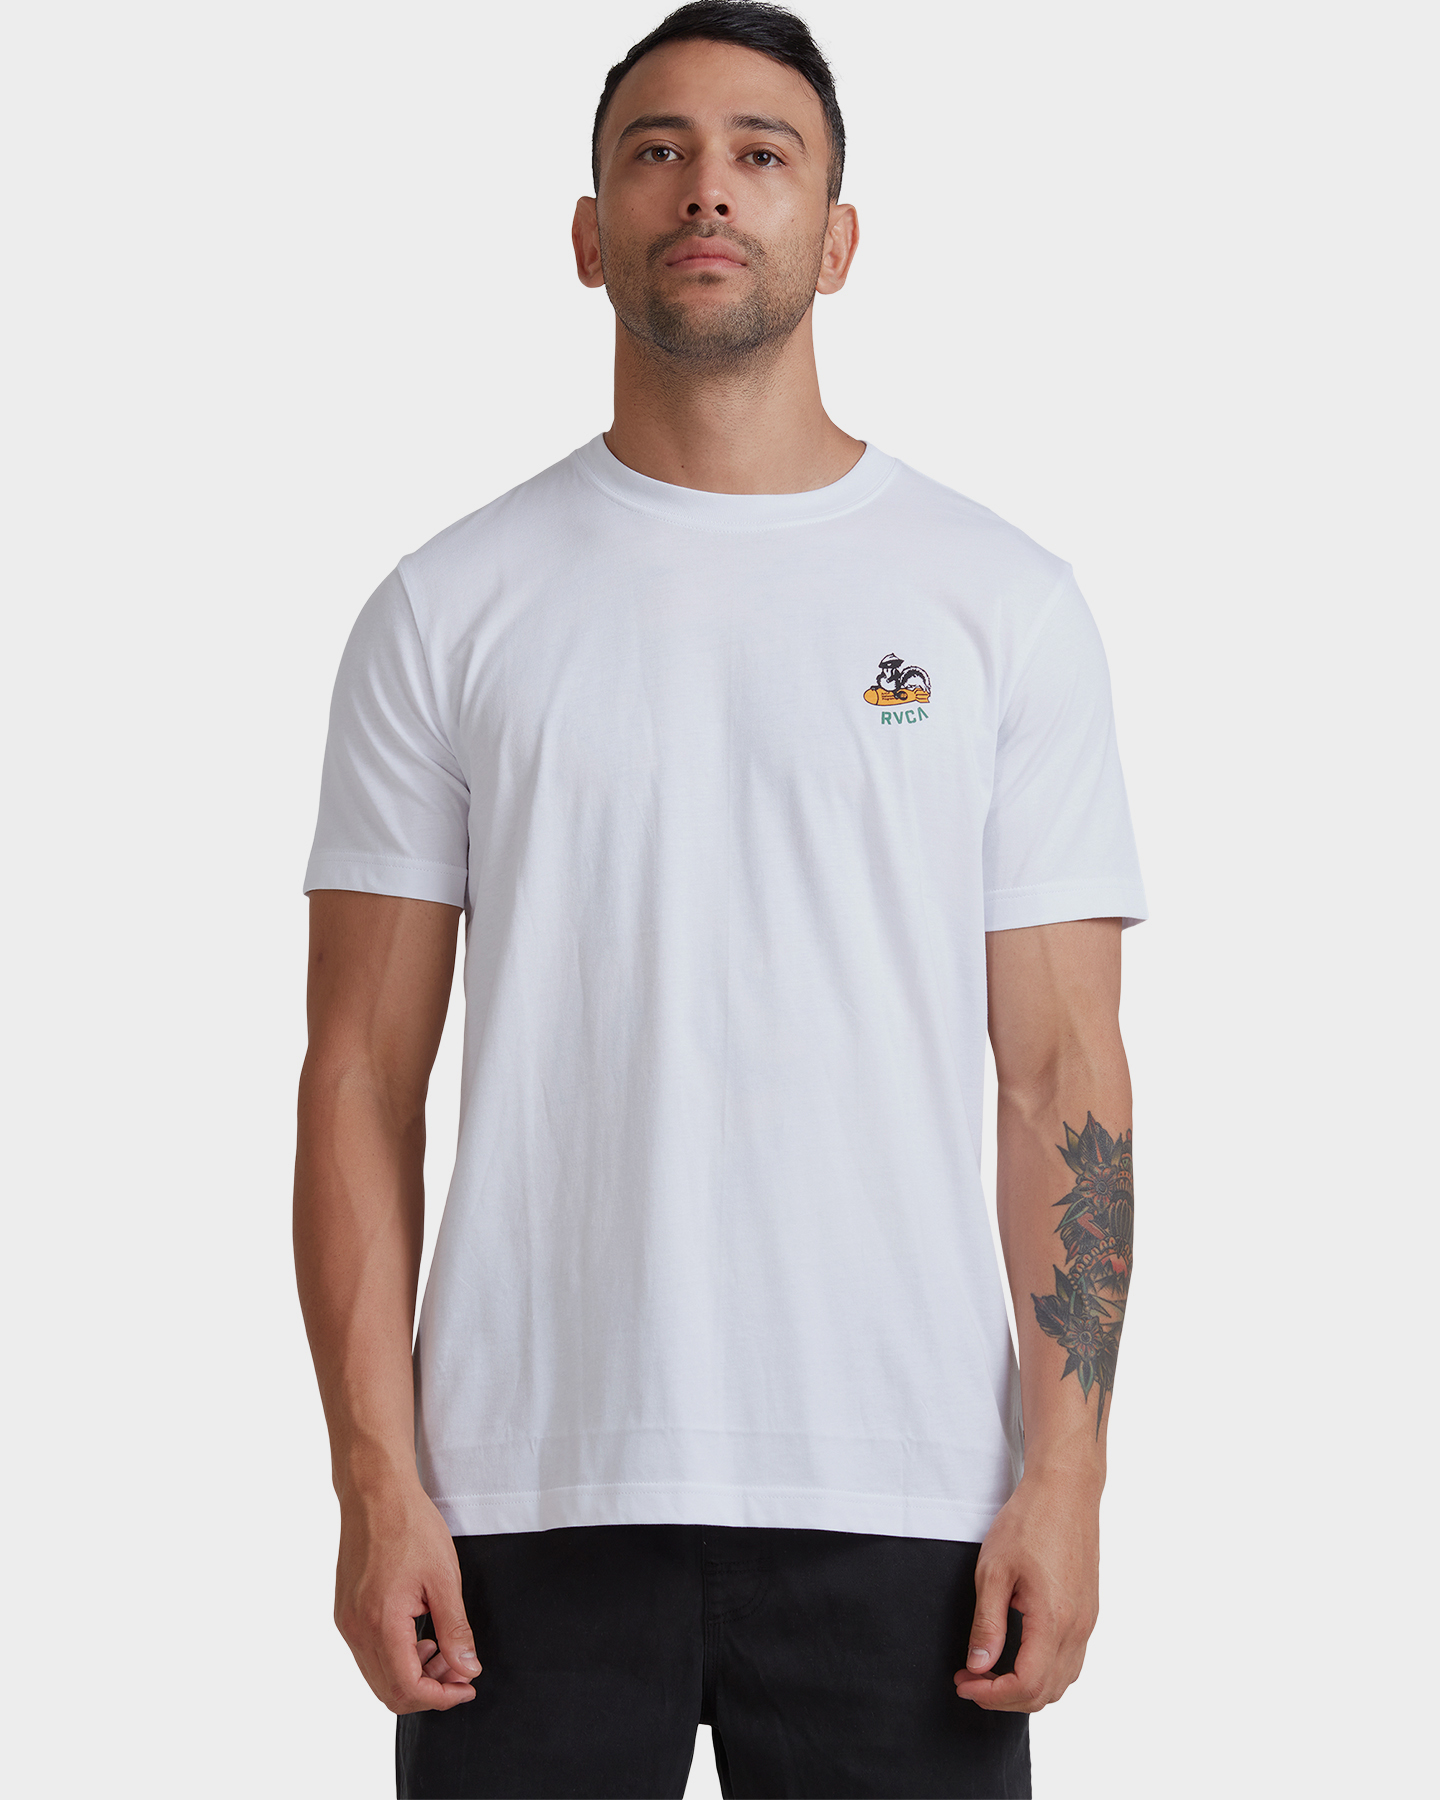 Rvca Skunk Weapon Ss Tee - White | SurfStitch